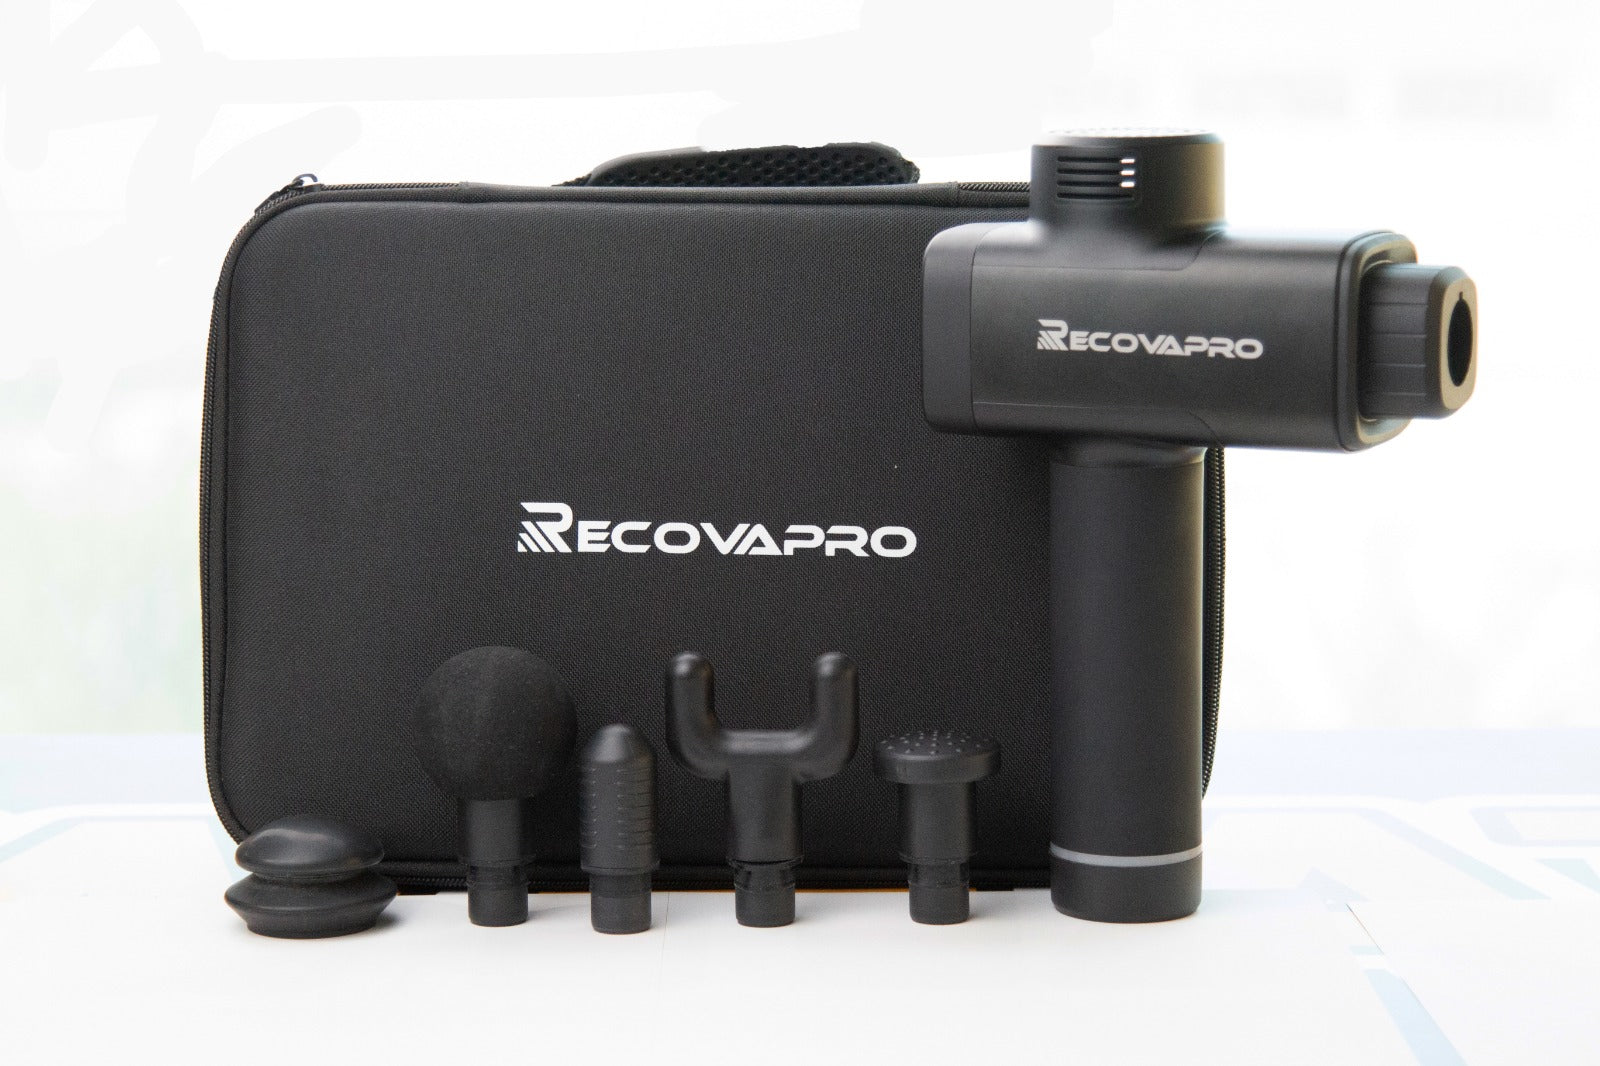 What sets Recovapro apart from all other "massage device" being offered online?